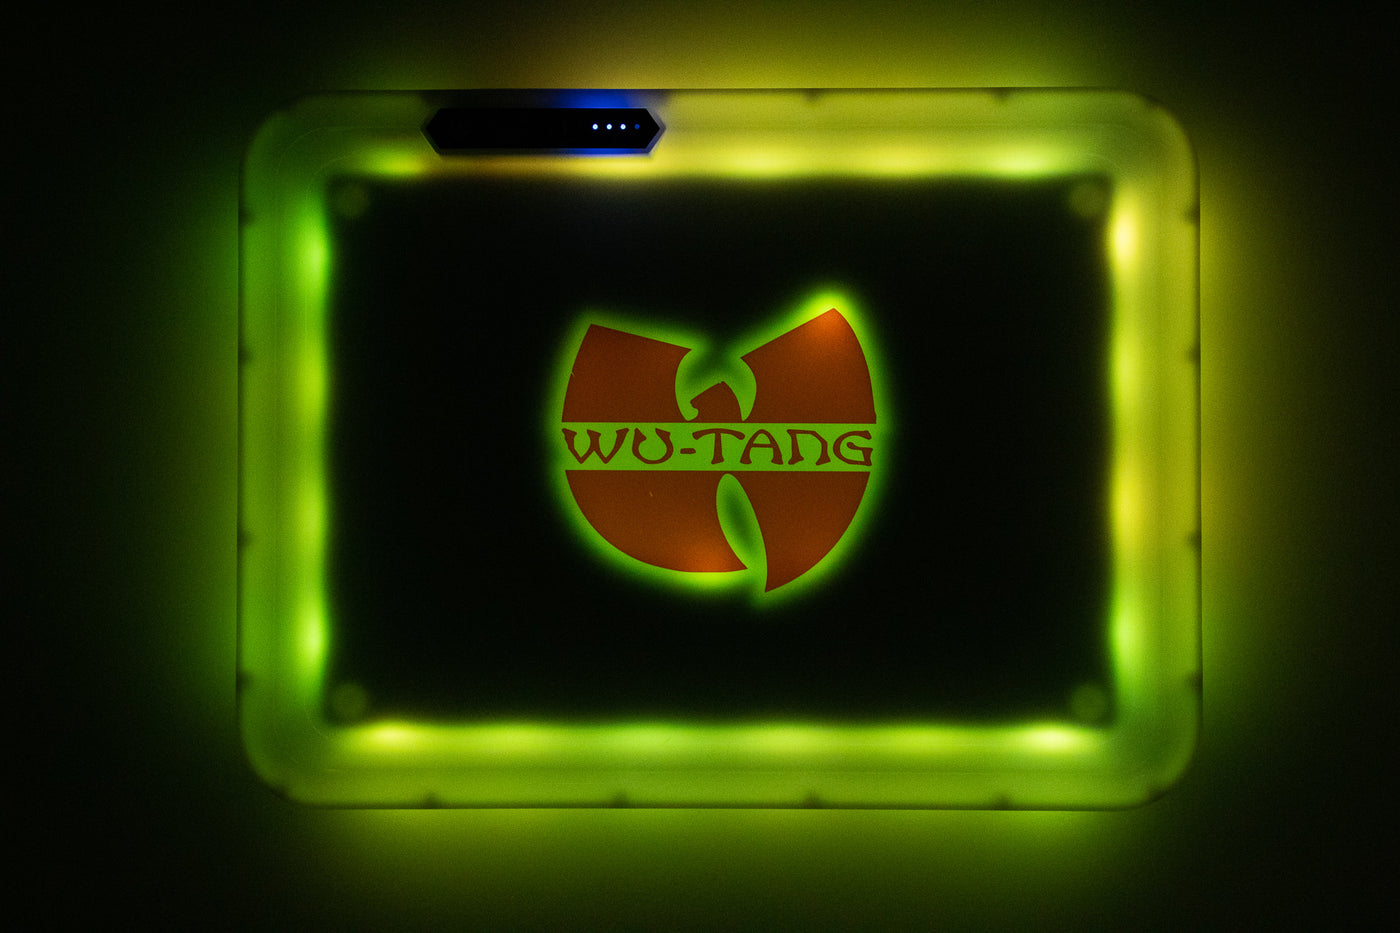 Image of Wu LED Rolling Tray in the color setting lime green